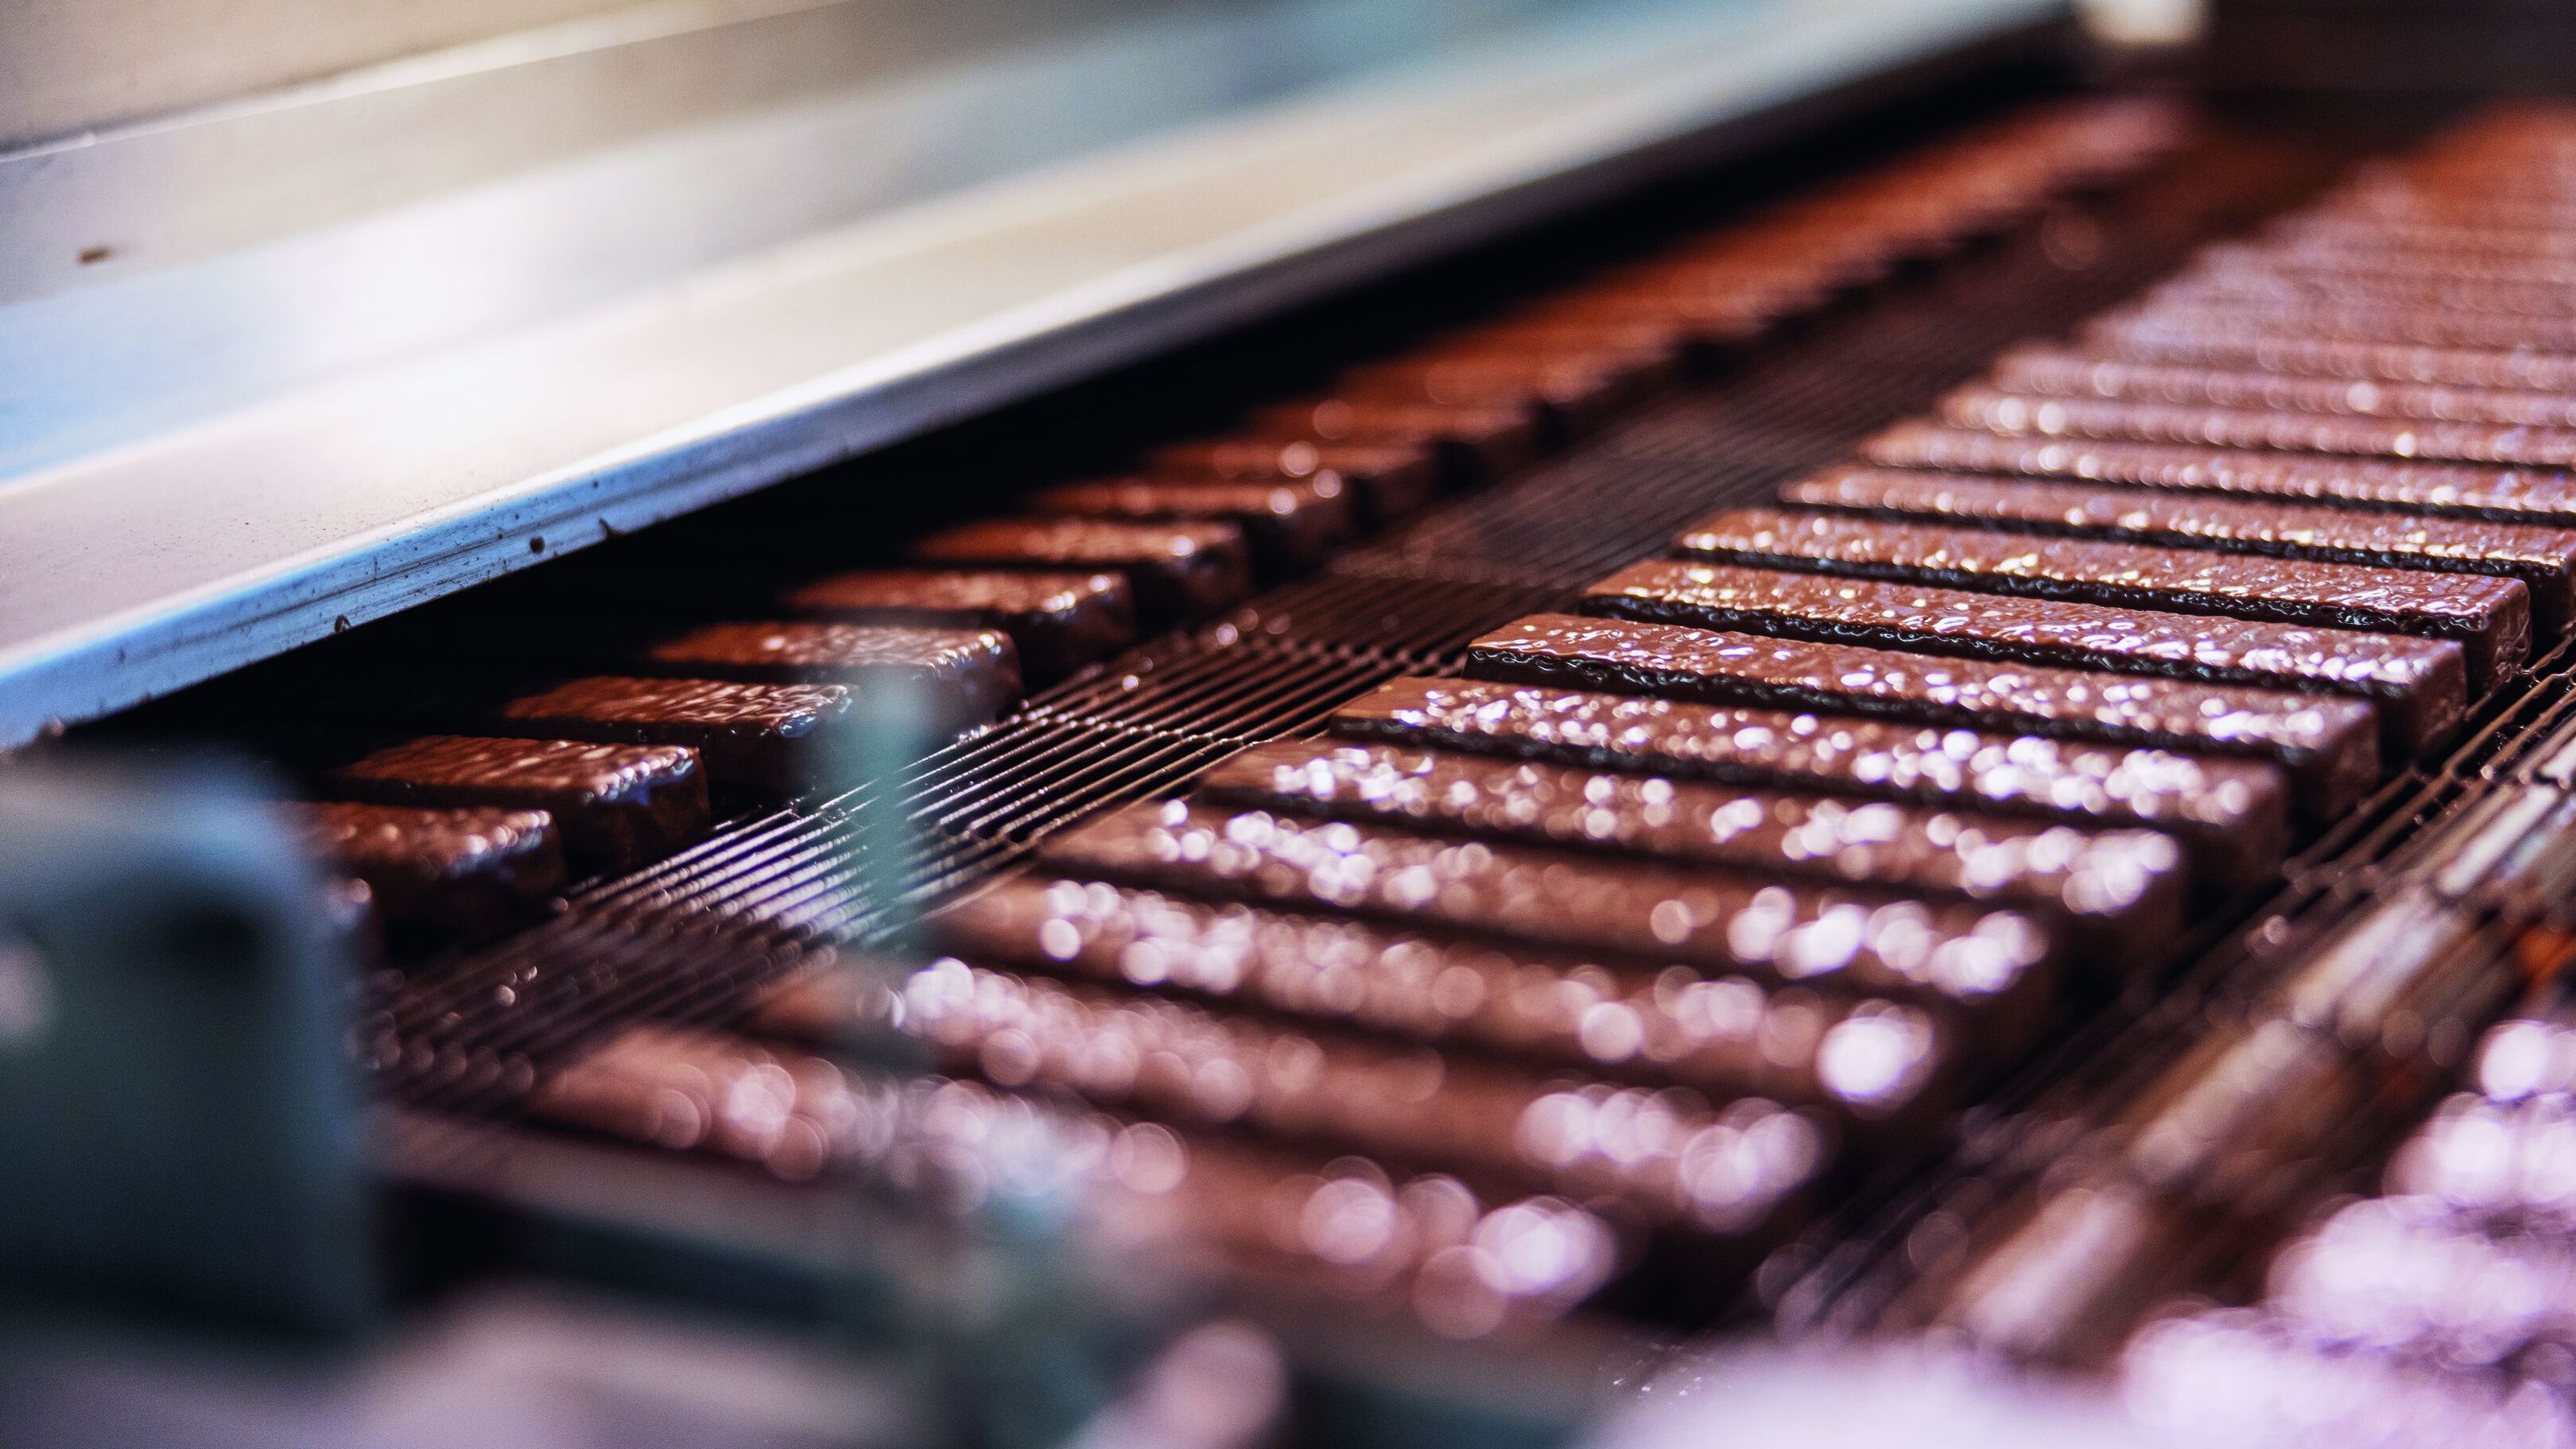 chocolate wafers produced at Kägi within one day cover a distance of 100 kilometers.